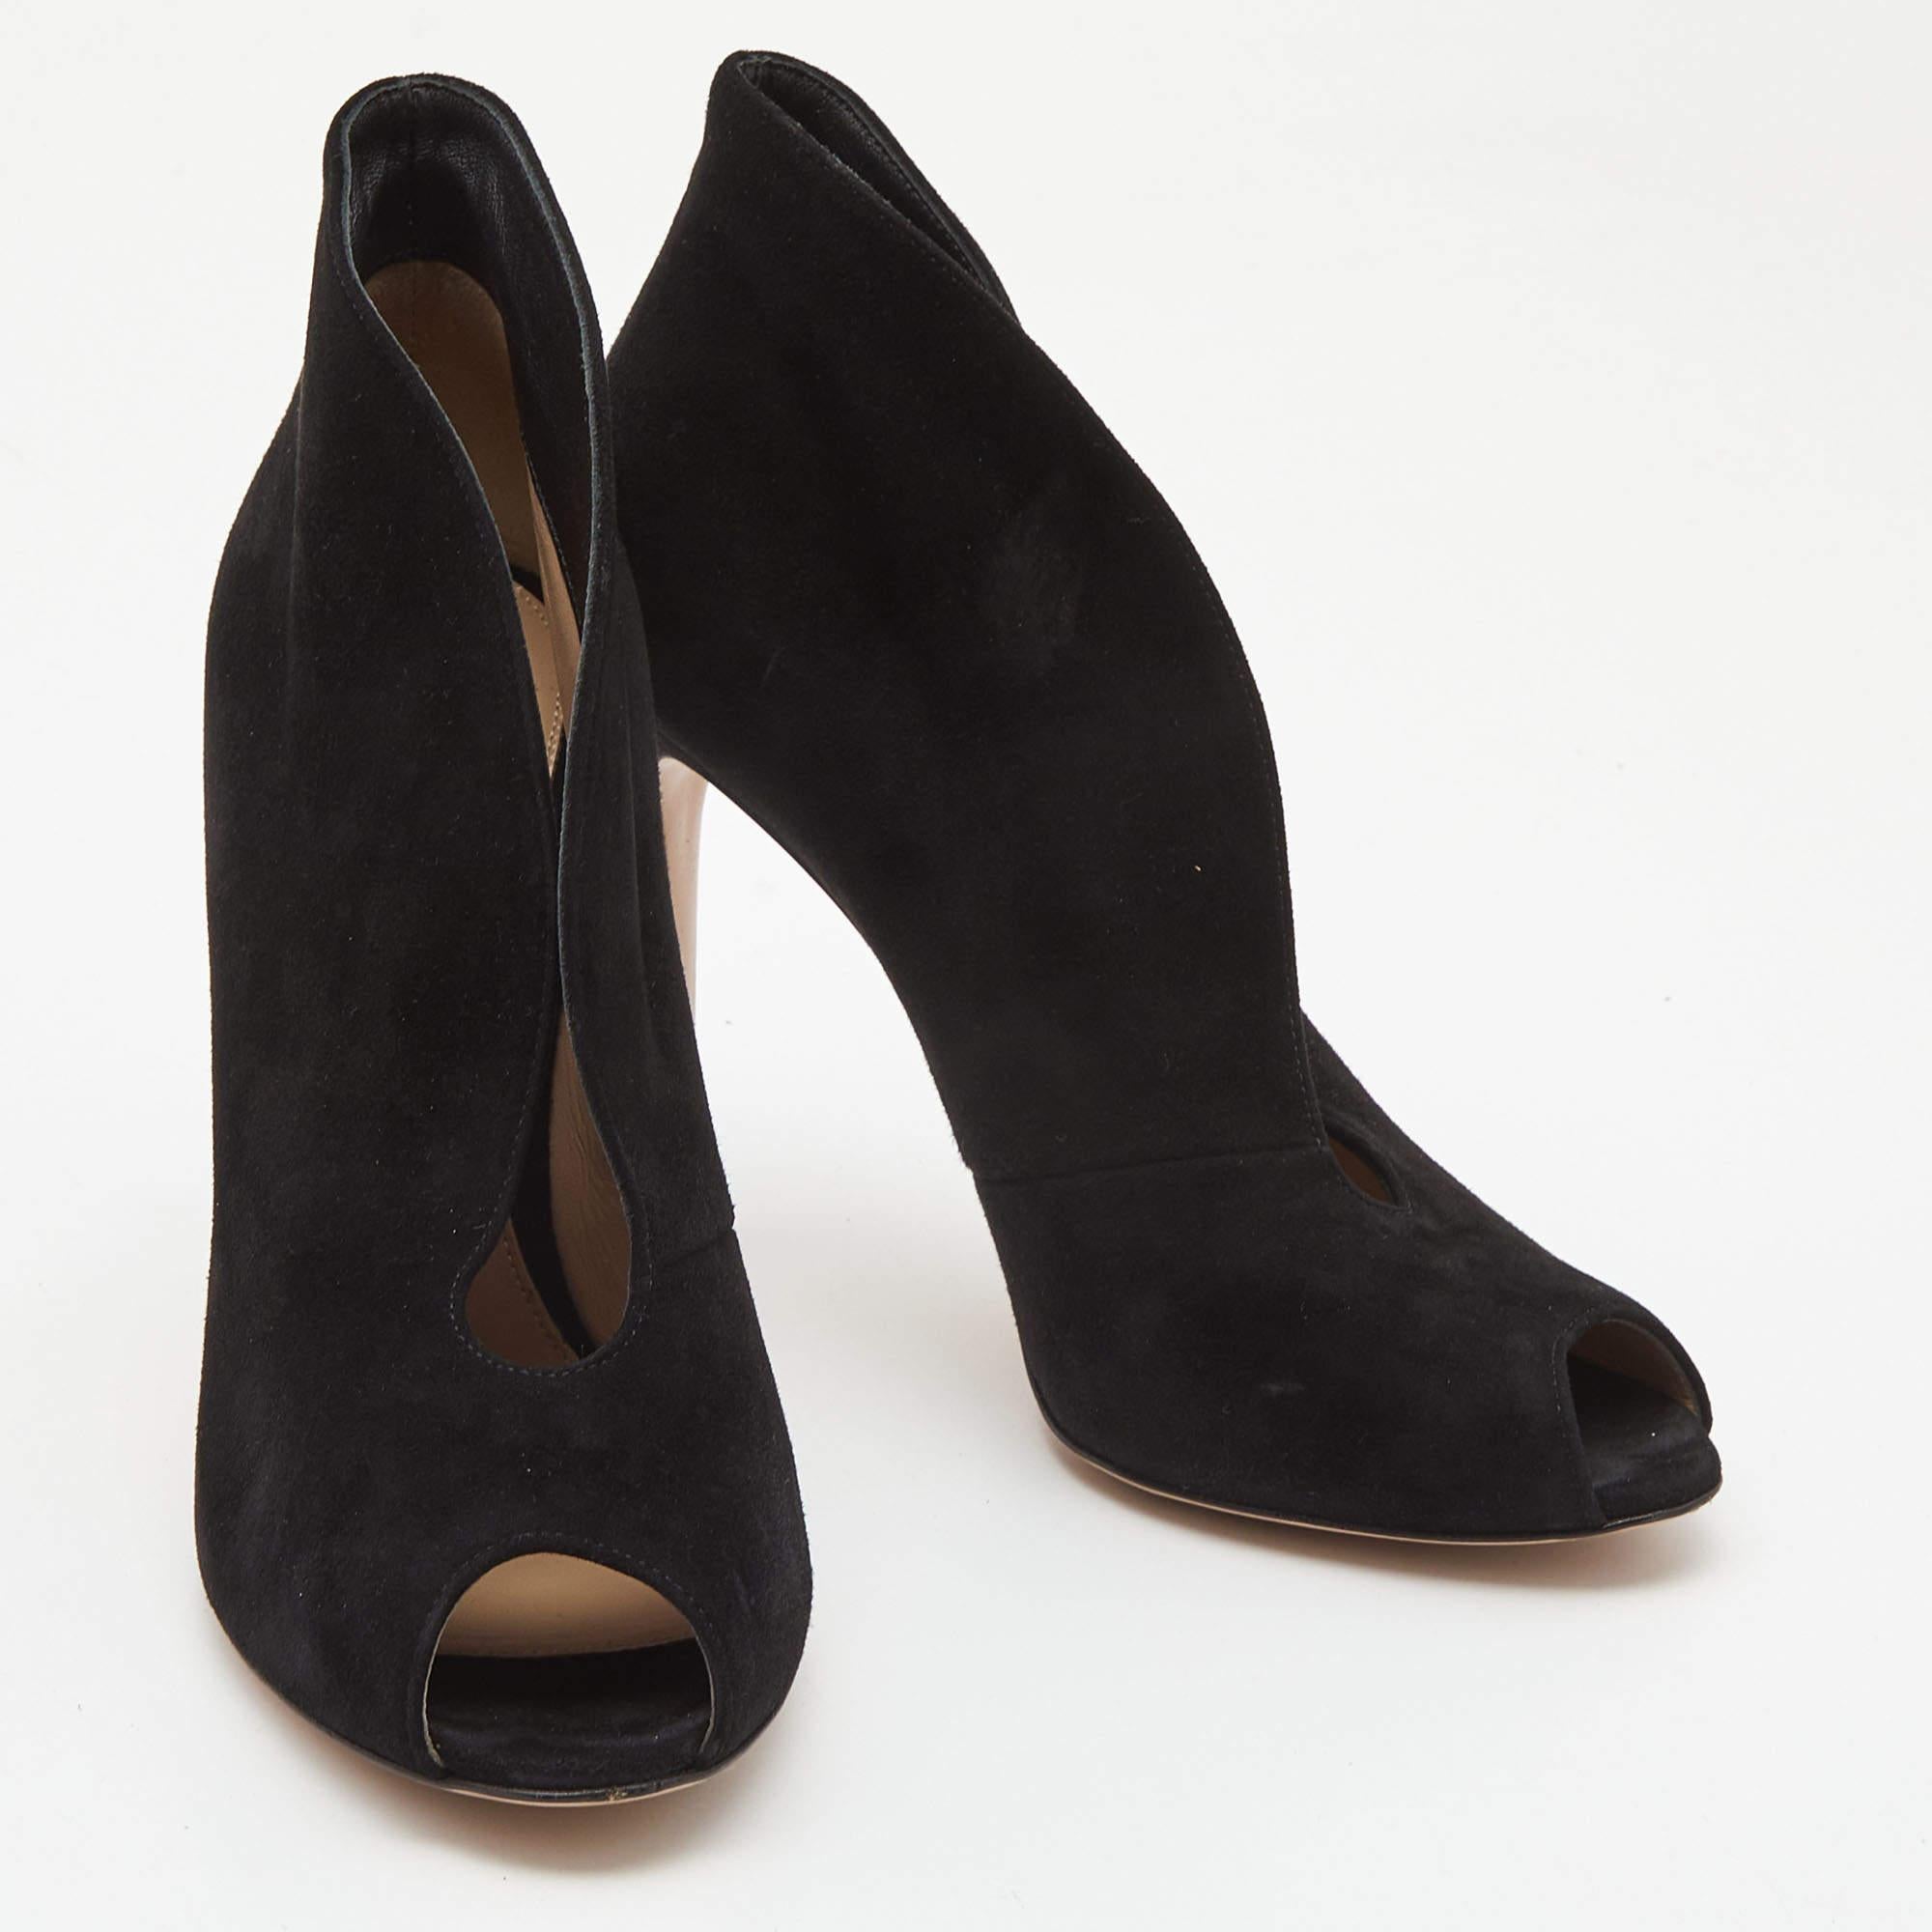 You are sure to stun onlookers with these slip-on booties from Gianvito Rossi as they're absolutely gorgeous! Meticulously crafted from suede, they carry a black shade along with peep toes and 11 cm heels. Hurry and make them yours today!

